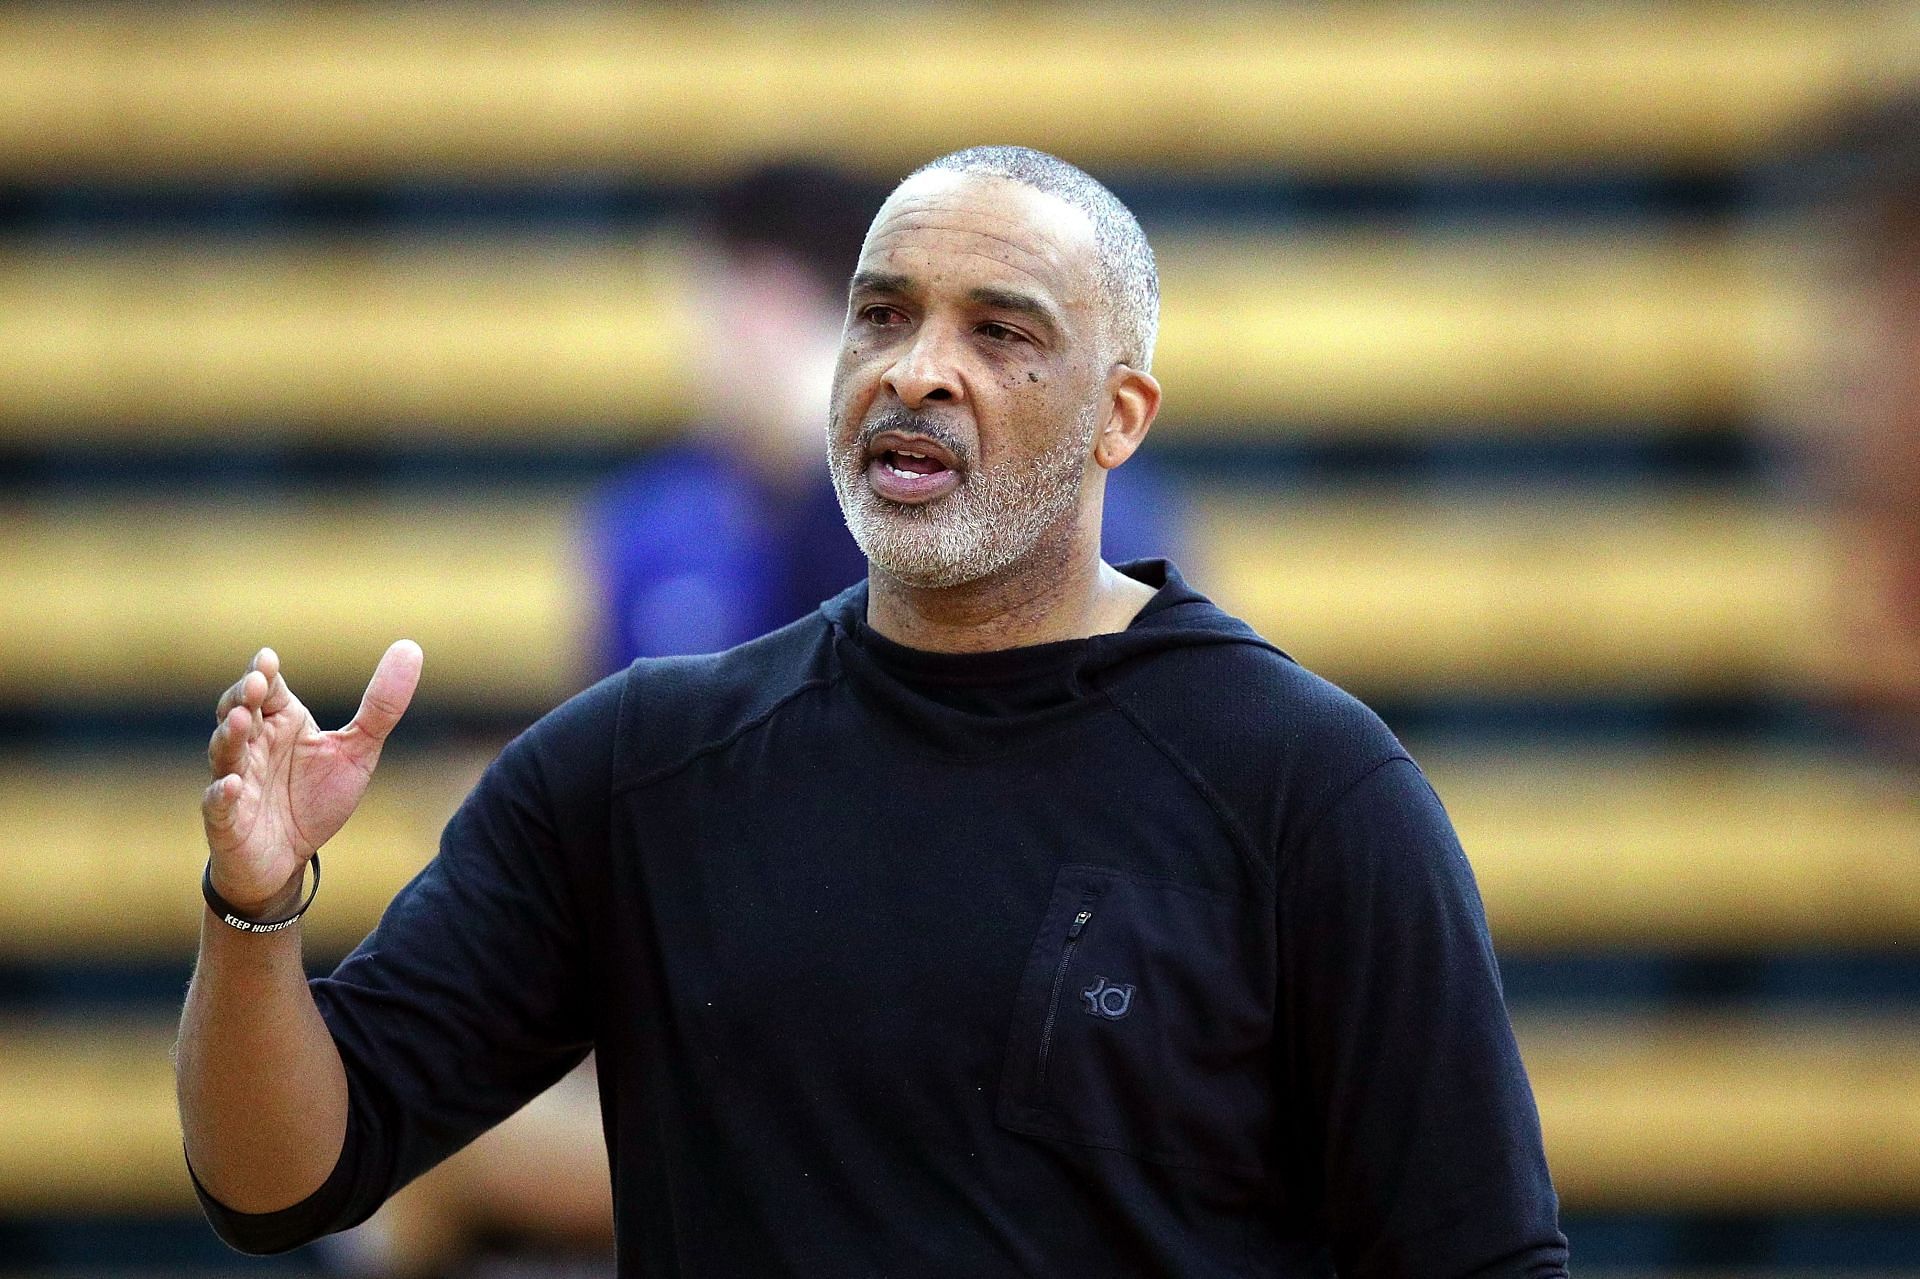 Phil Handy has served as a player development coach for the LA Lakers under Mike Brown.